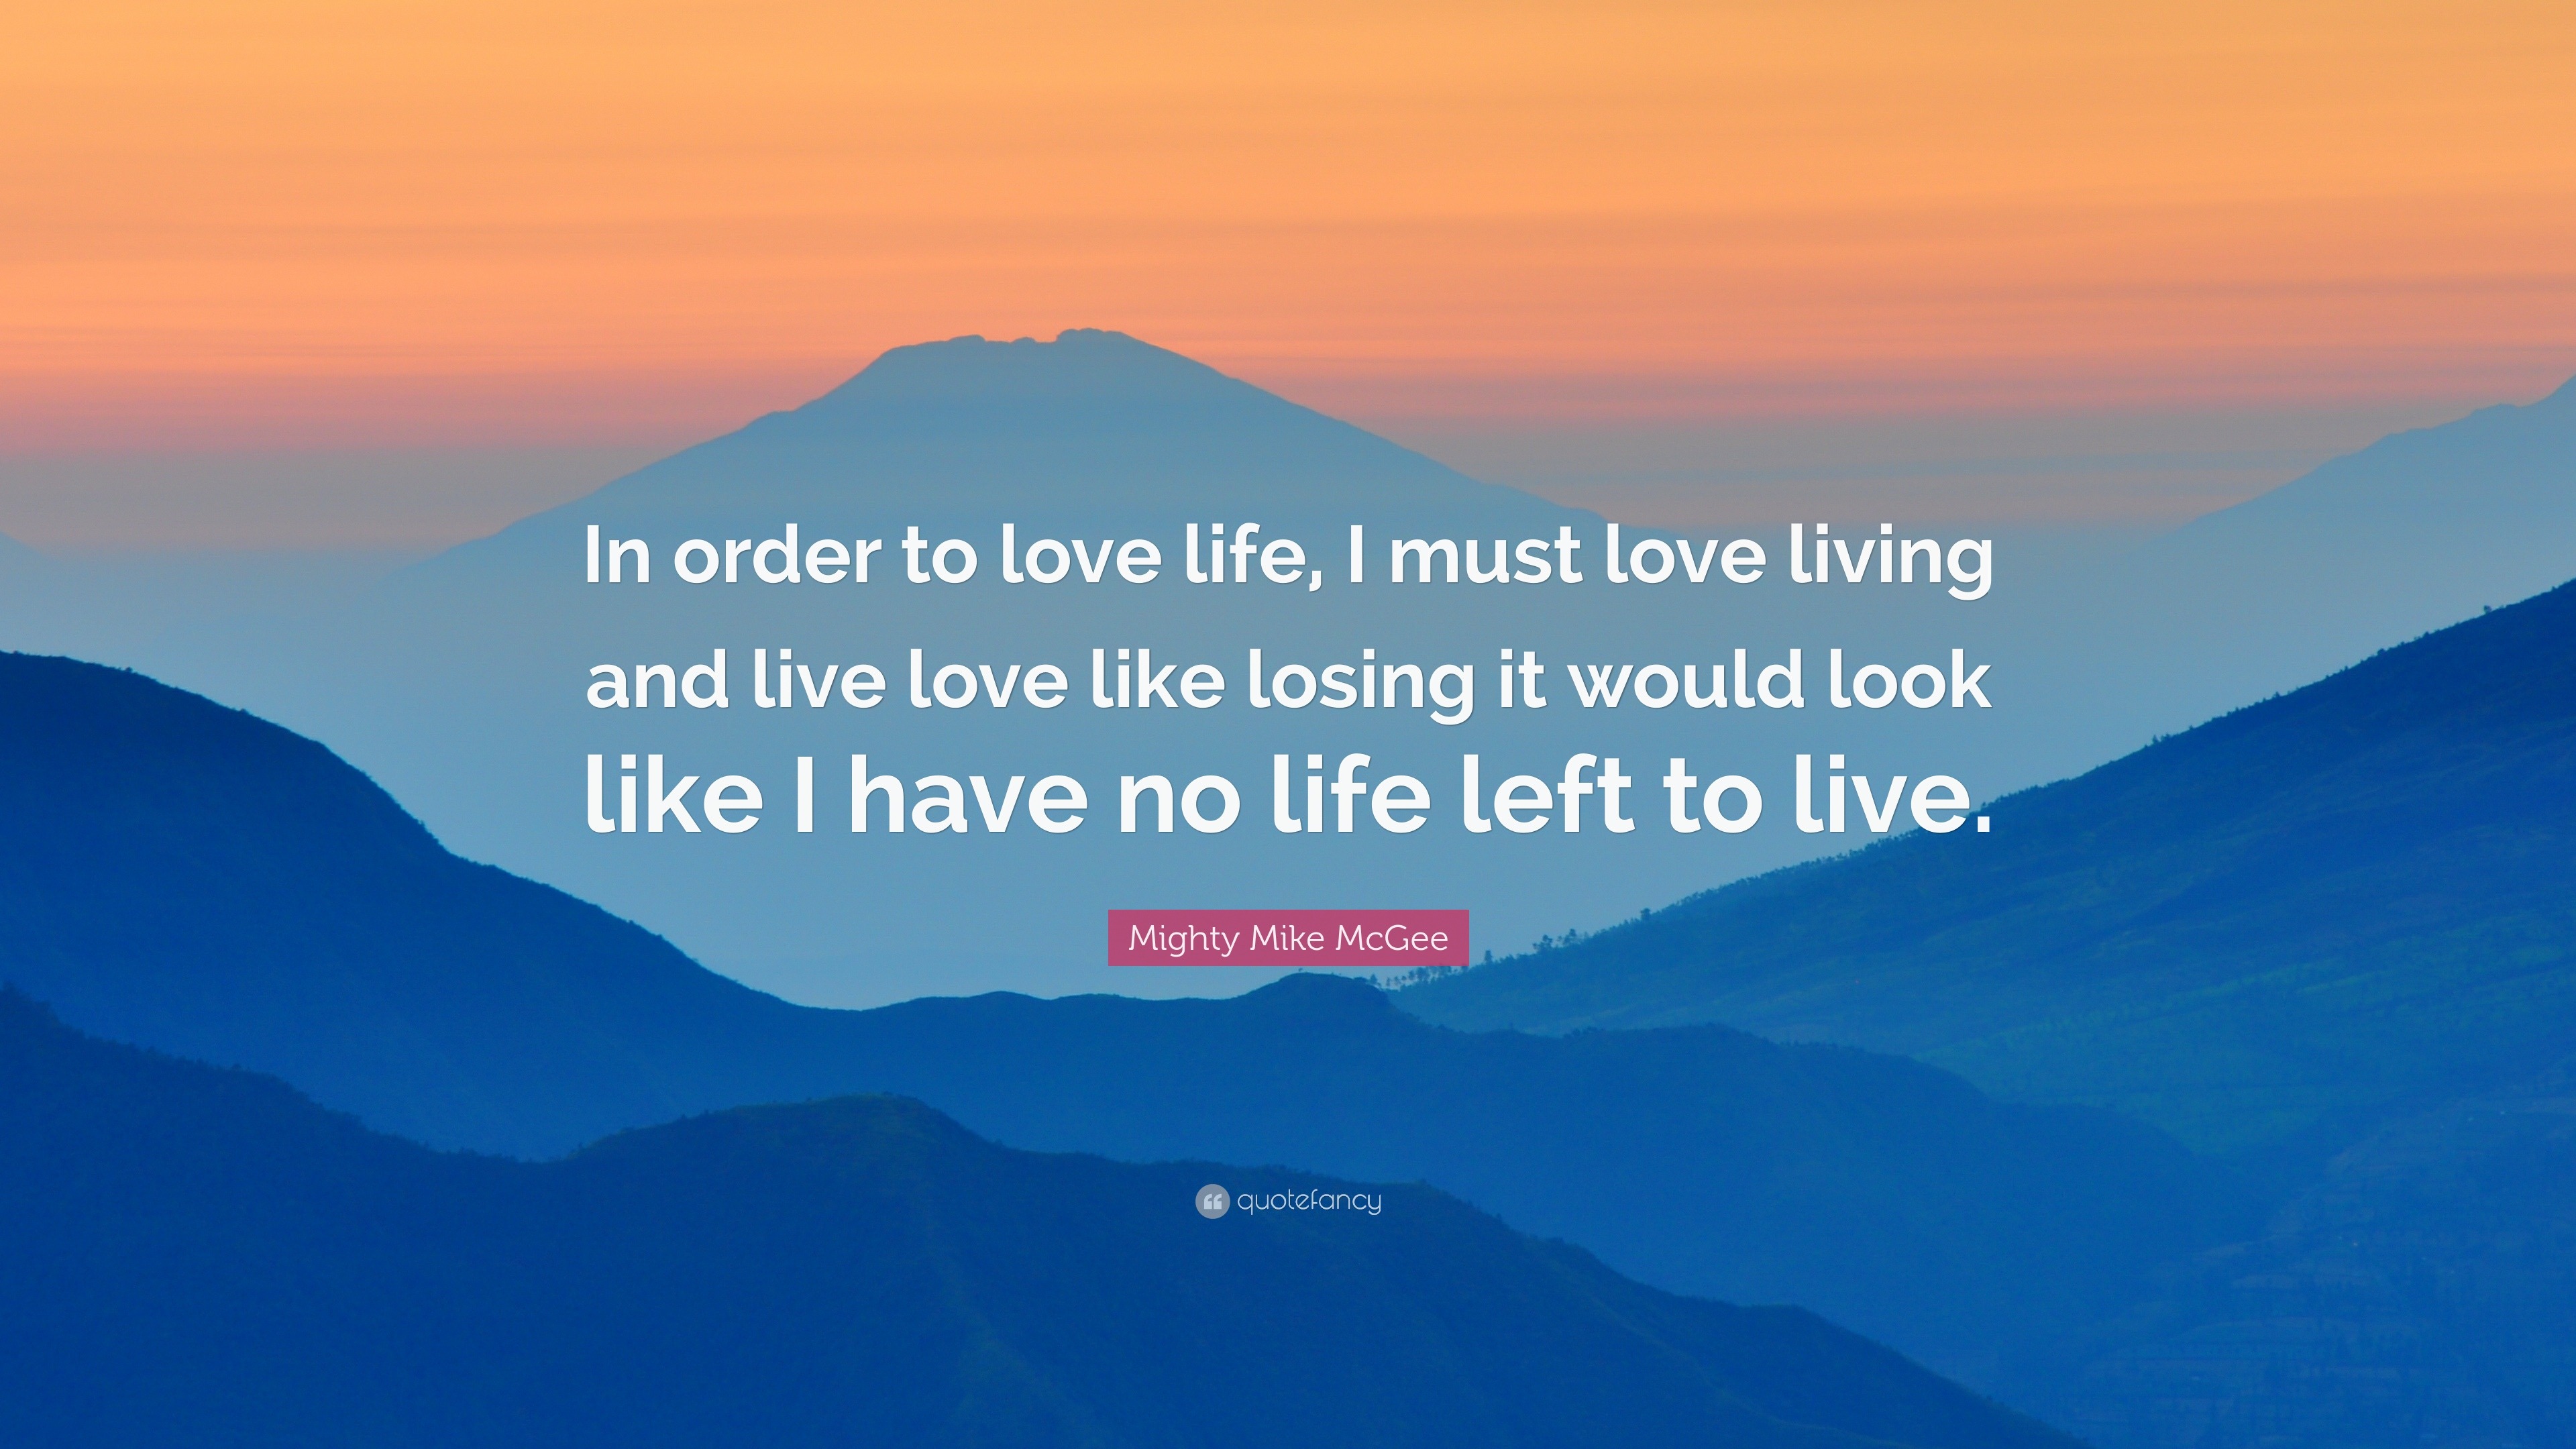 Mighty Mike McGee Quote “In order to love life I must love living